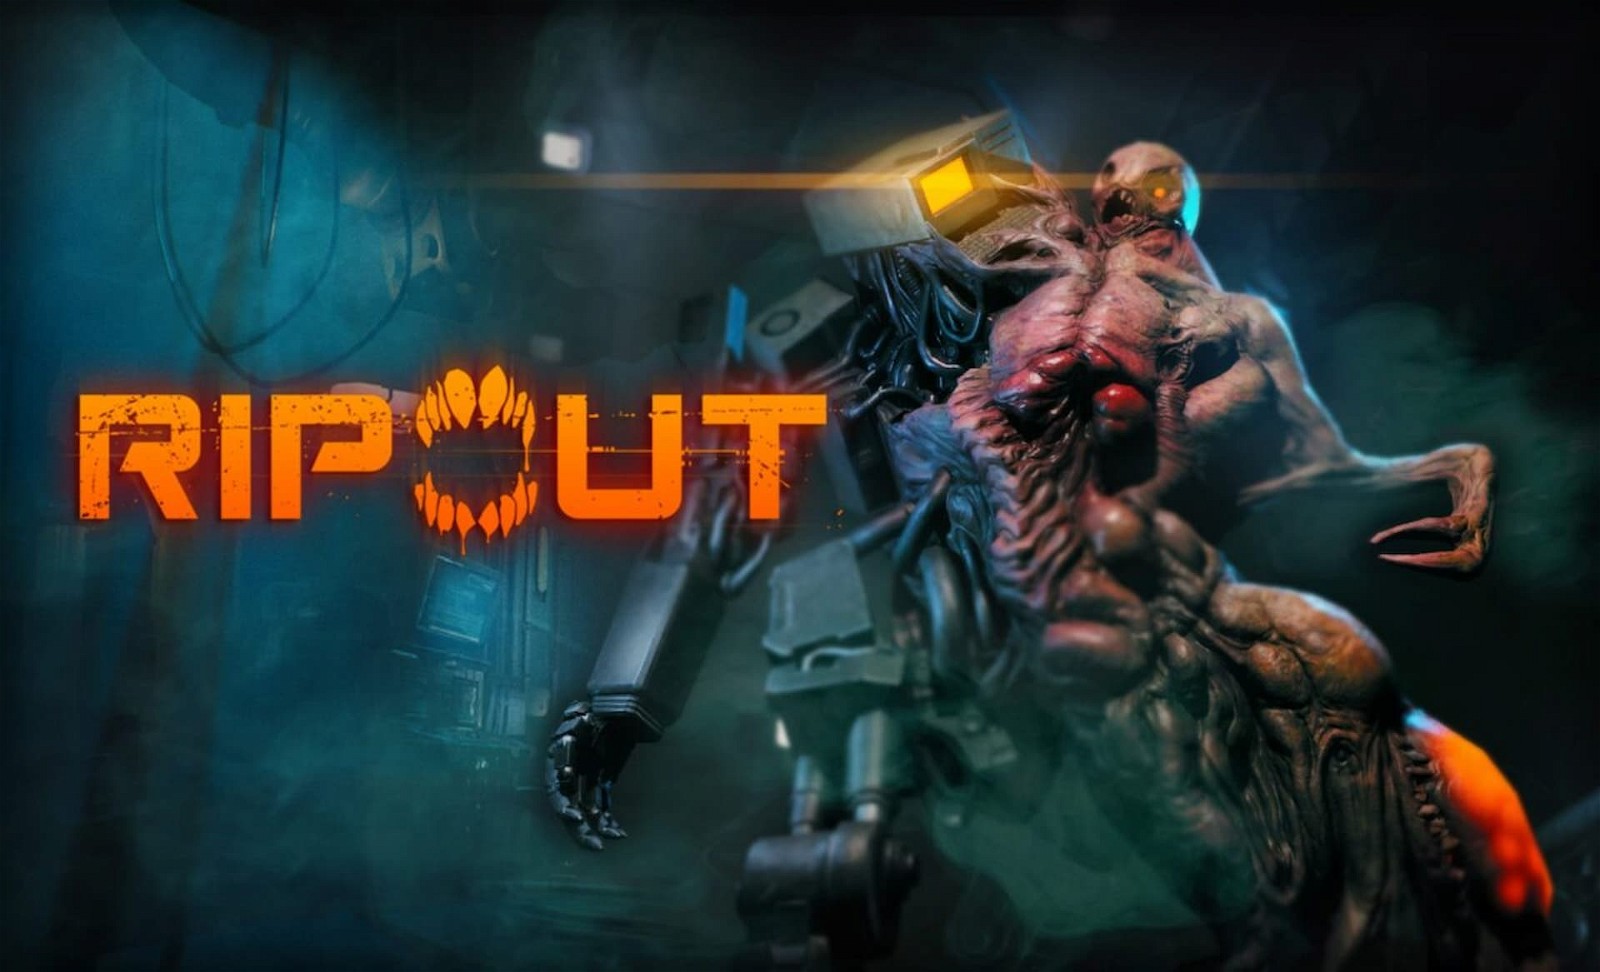 Ripout enters PC early access on October 24, 2023 